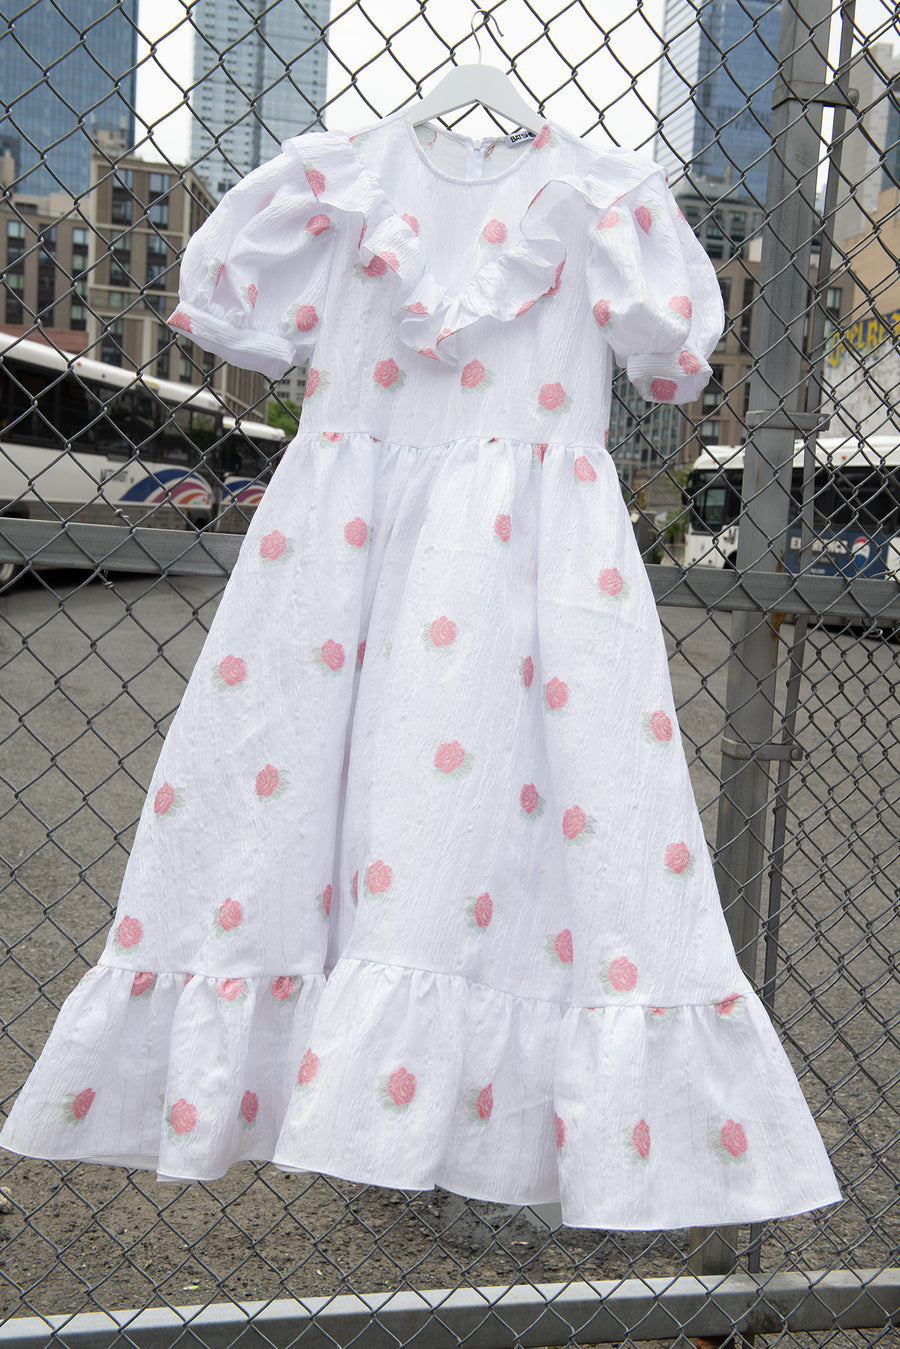 BATSHEVA - One-of-a-Kind Ruffle May Dress in Pink Floral Jacquard